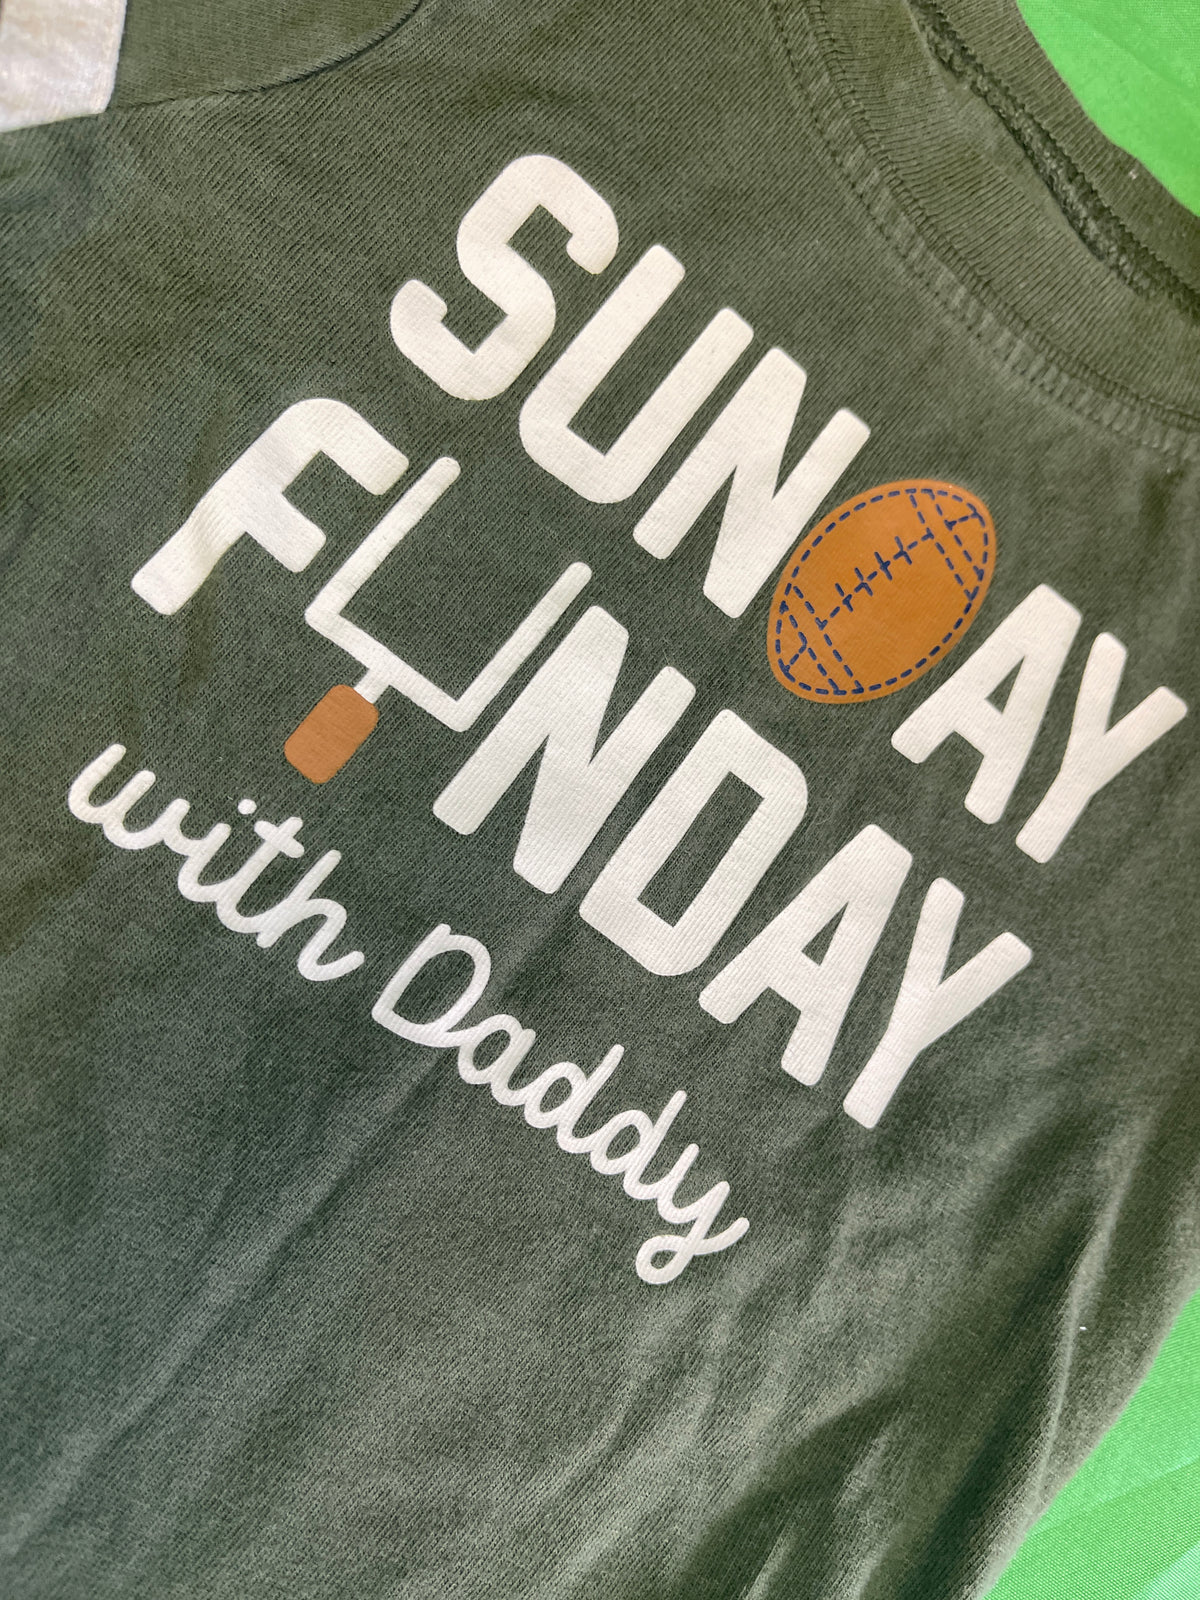 American Football "Sunday Funday with Daddy" Bodysuit/Vest 18 Months